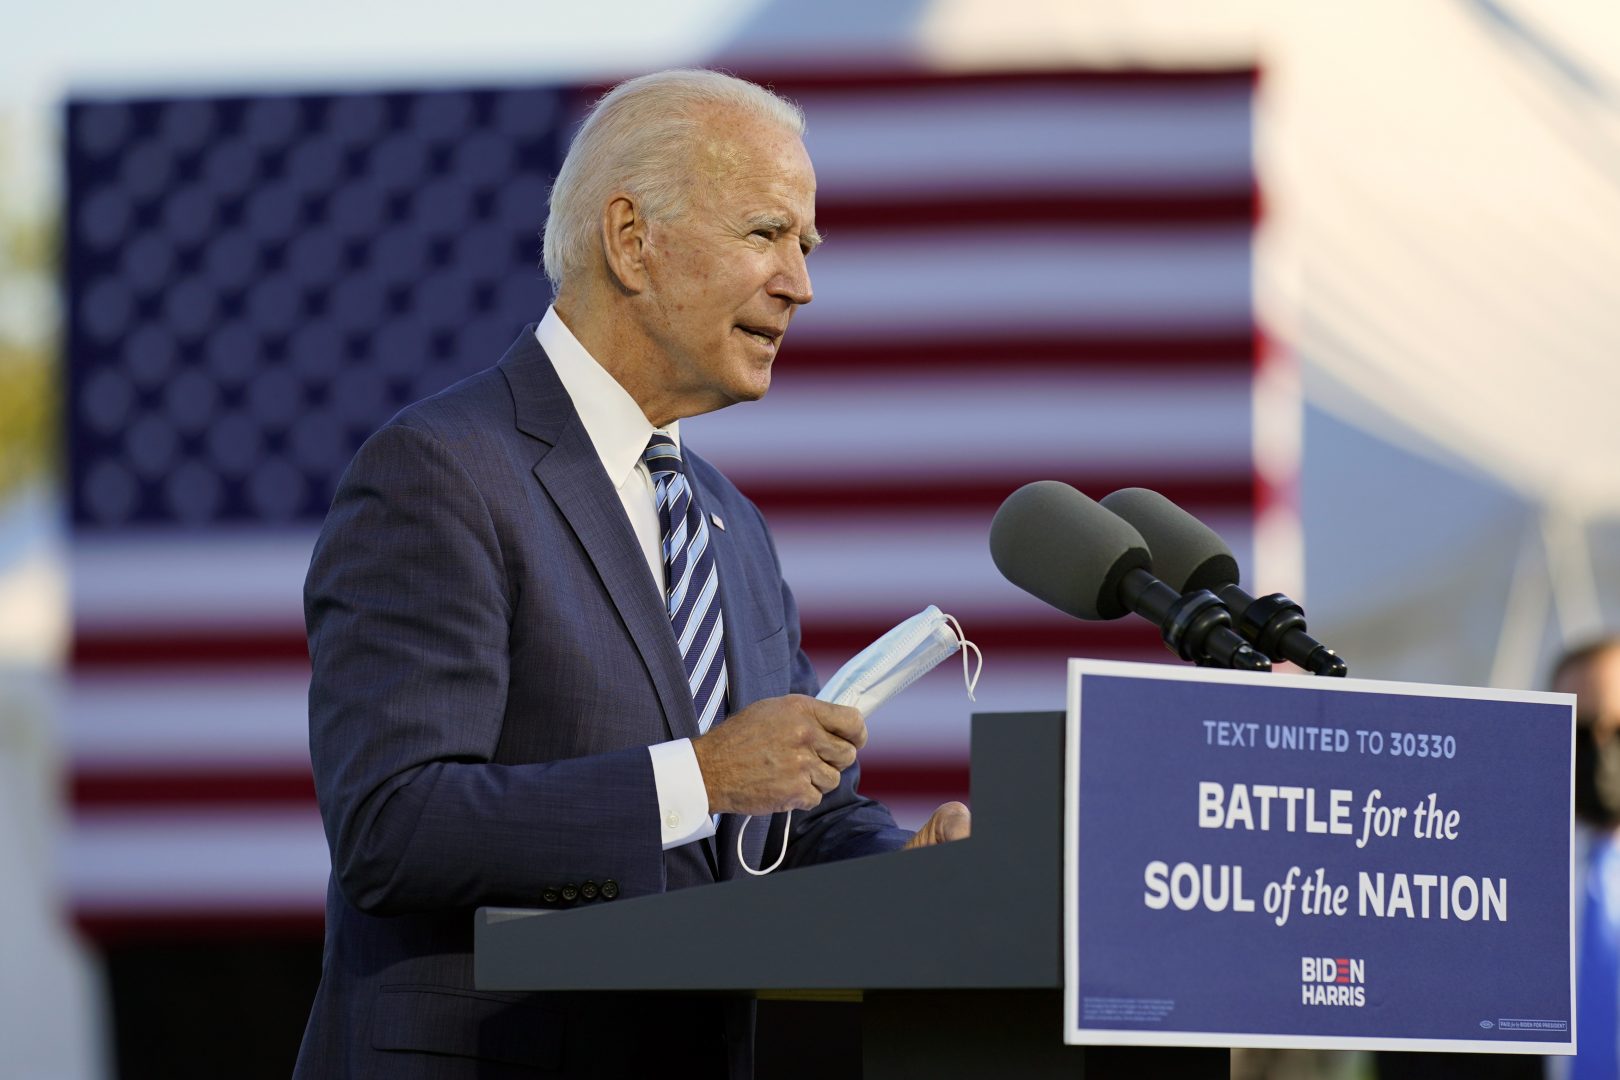 Democratic presidential candidate former Vice President Joe Biden talks about wearing a face mask as he speaks at Gettysburg National Military Park in Gettysburg, Pa., Tuesday, Oct. 6, 2020.